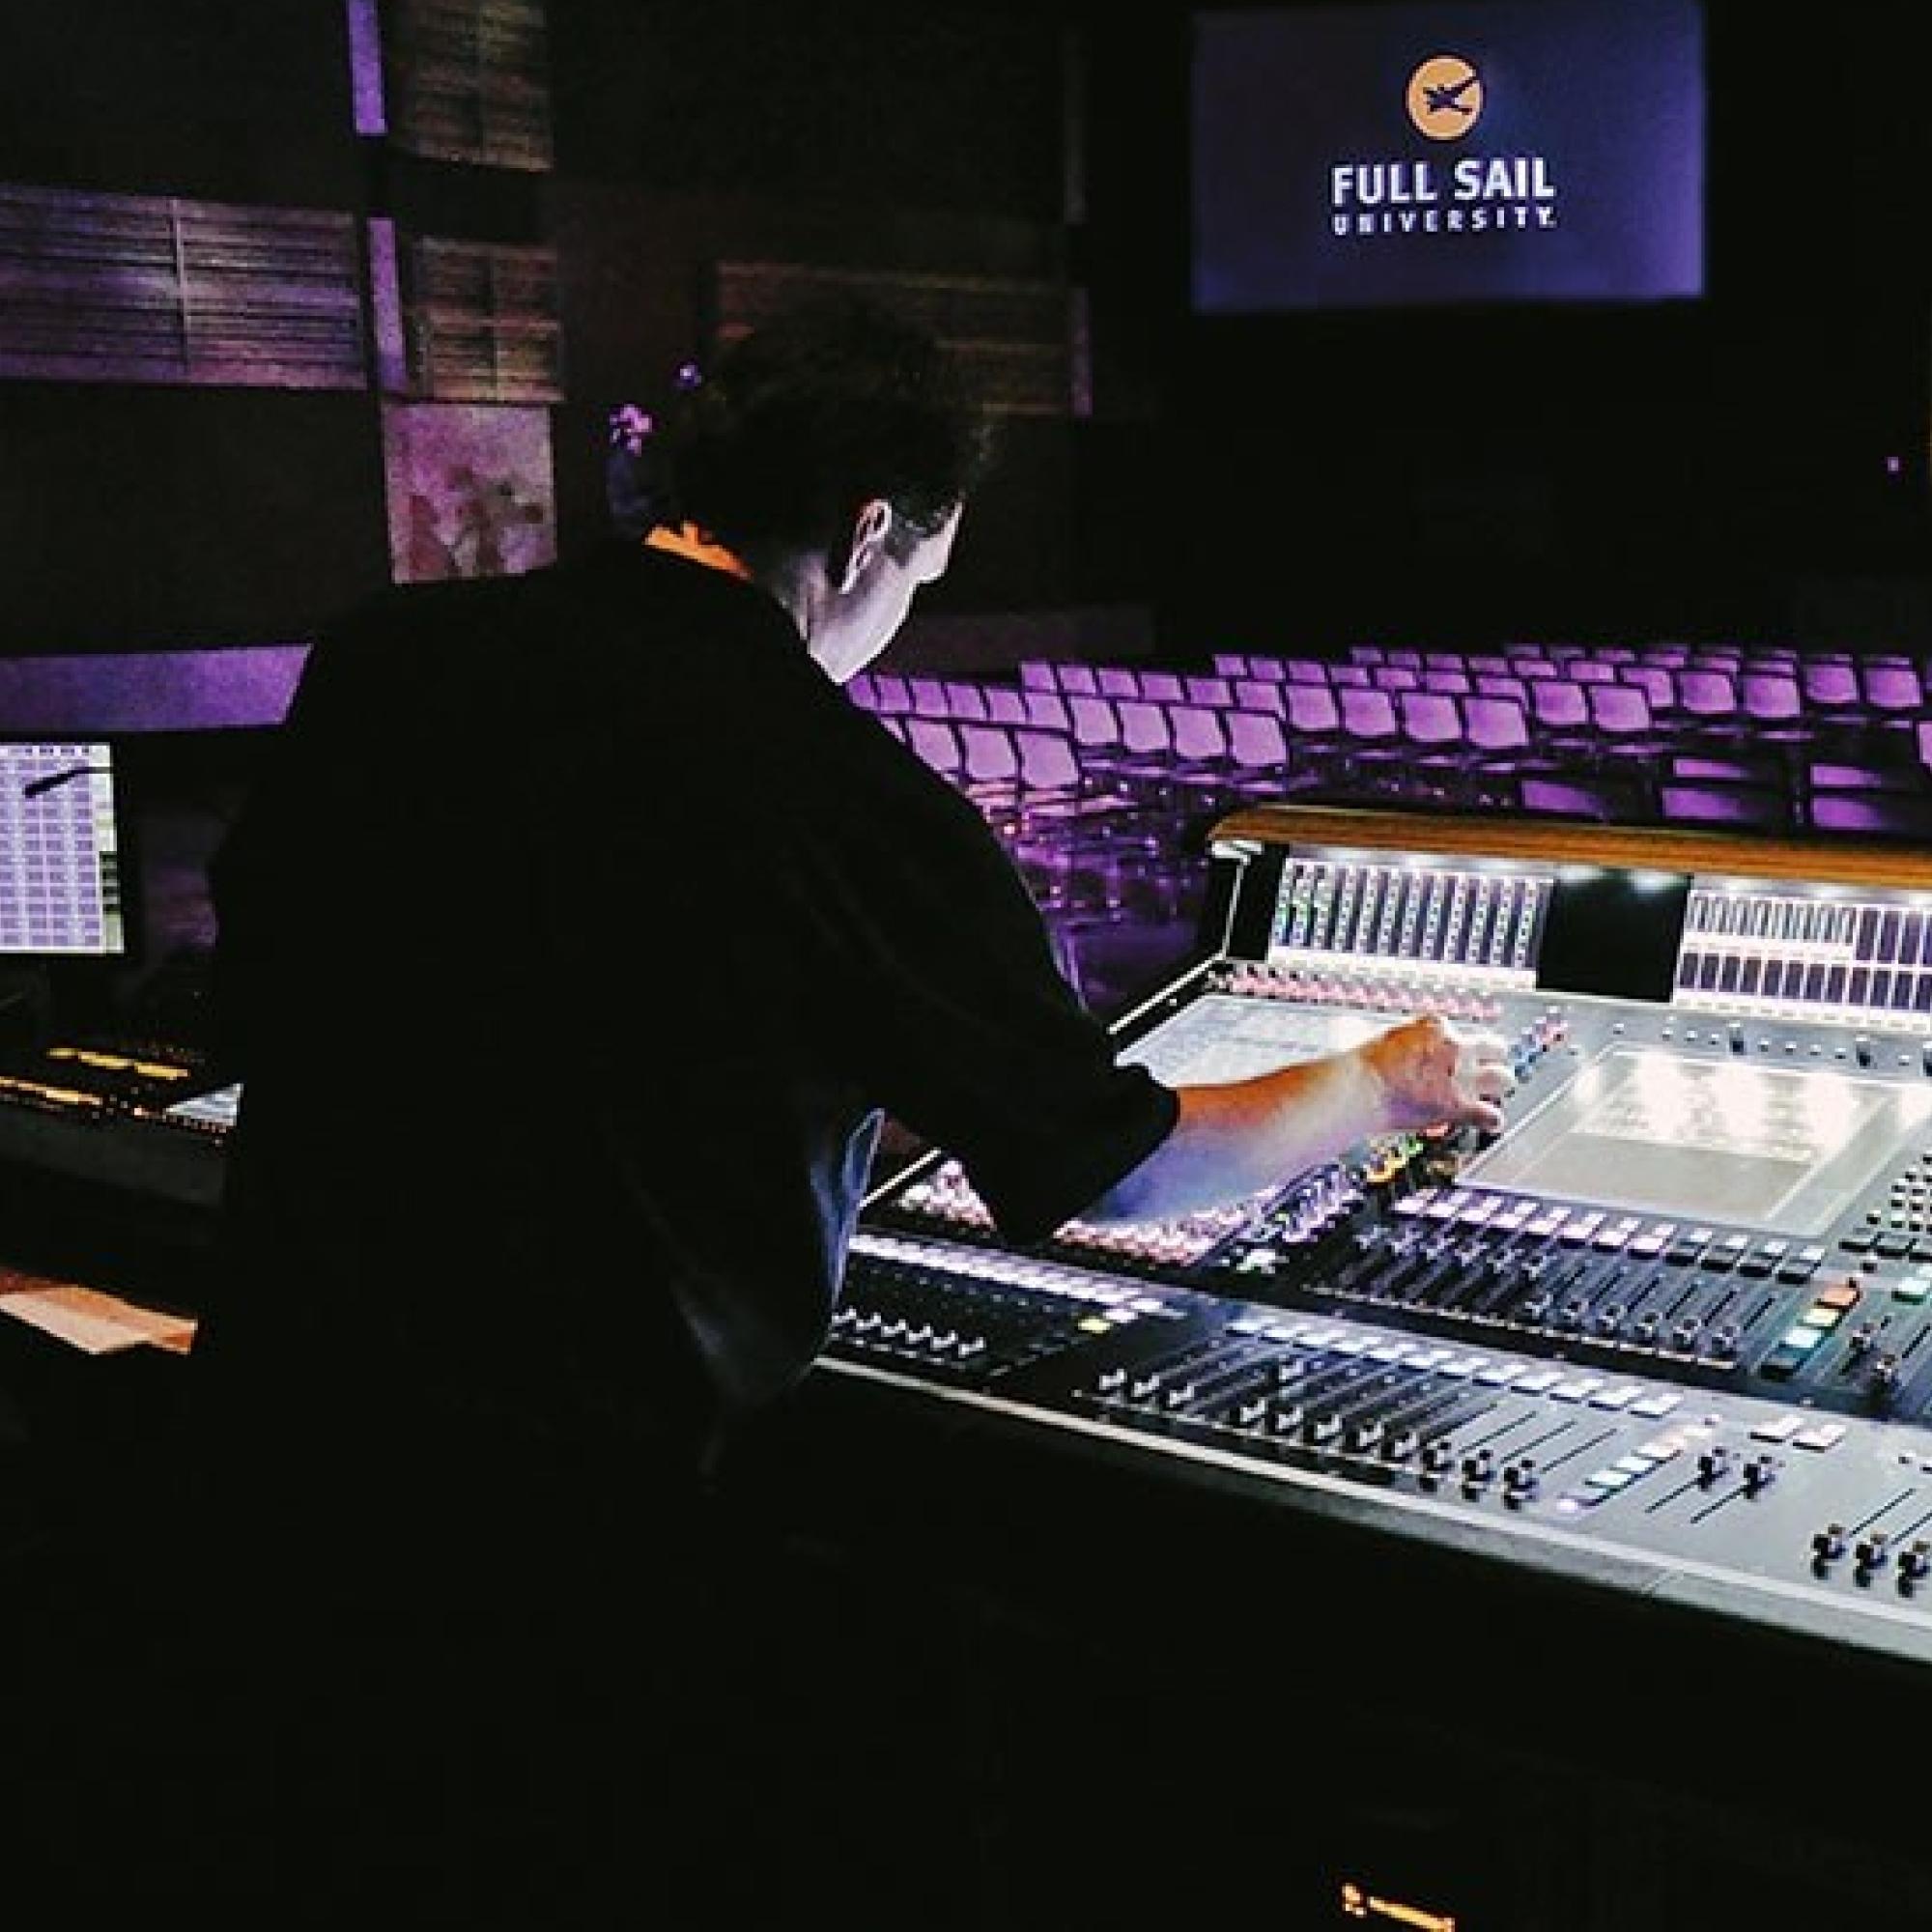 In the Full Sail Live Venue, a student works the production controls.